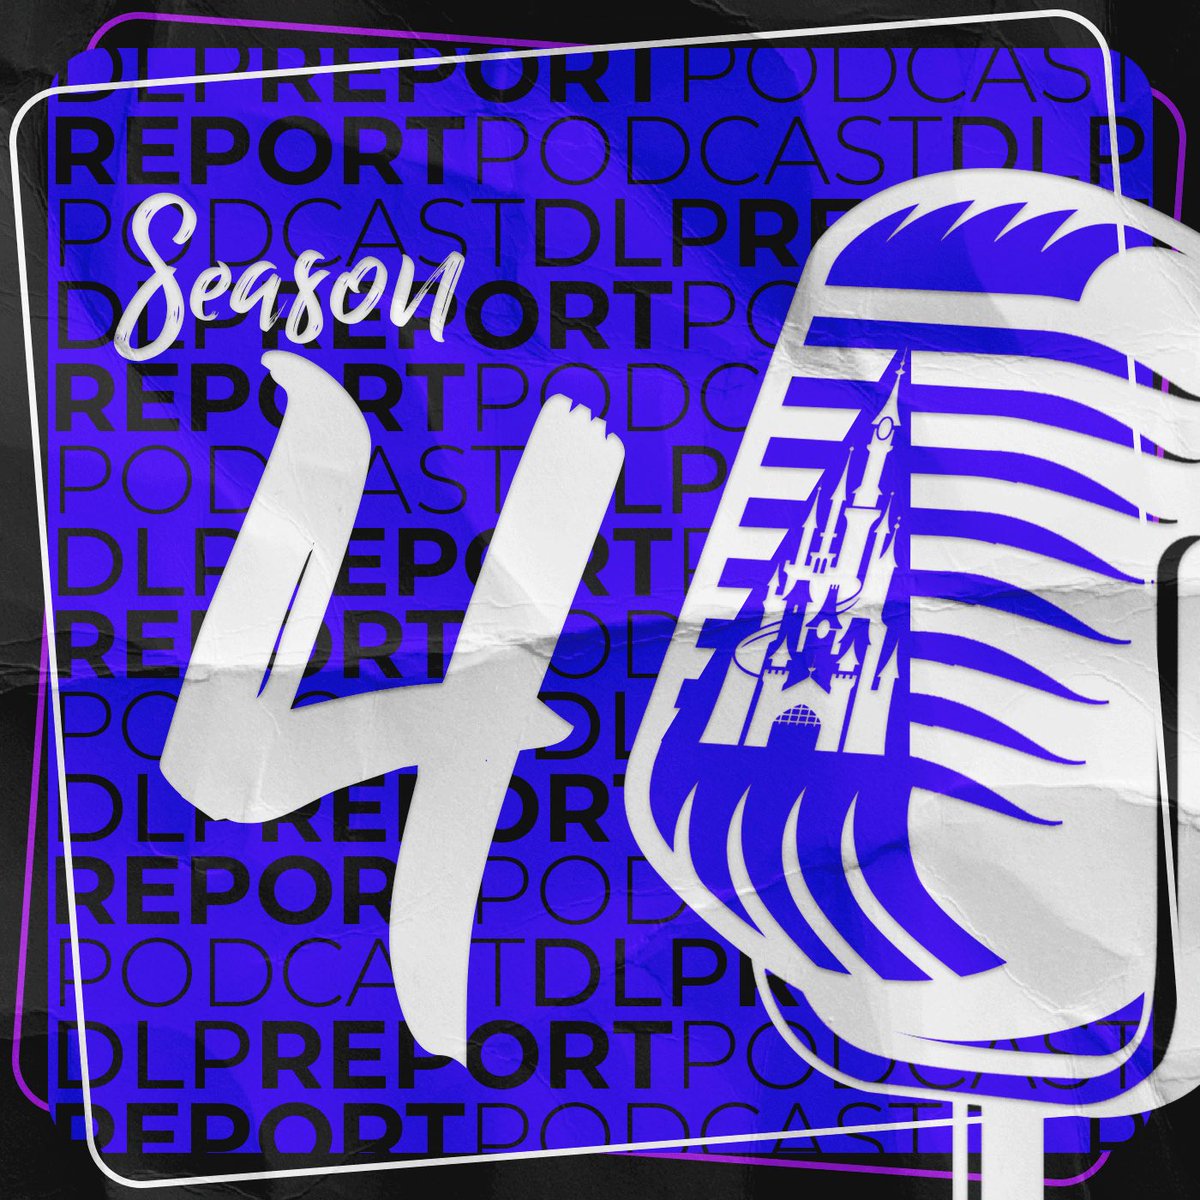 🎙️ The DLPReport Podcast is back! In our Season 4 premiere we discuss the Disneyland Hotel reopening, Disney Village remodel and Disney Adventure World. Listen & subscribe on: - Apple: podcasts.apple.com/us/podcast/dlp… - Spotify: open.spotify.com/show/6n3W6XkJT… - Web+more: dlpreport.com/en/podcast/